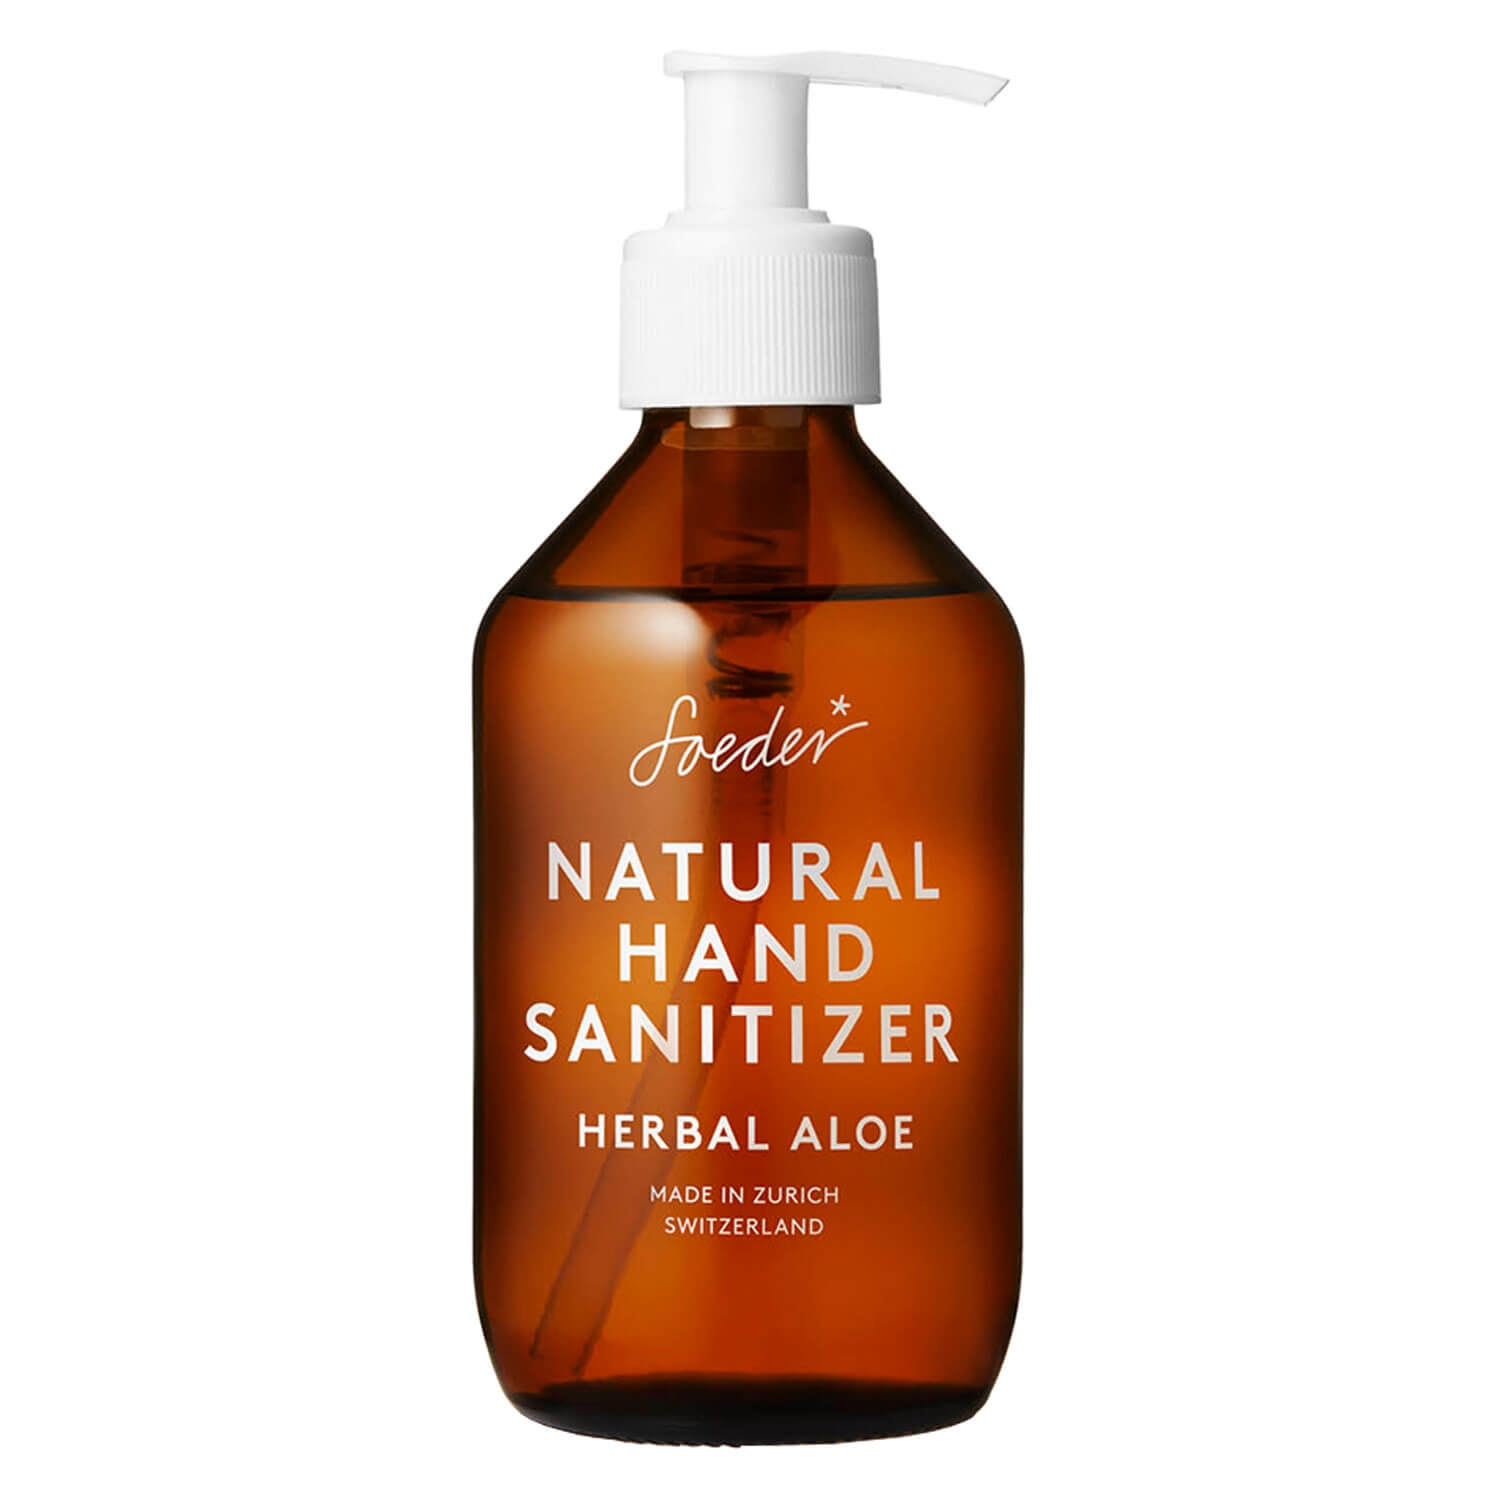 Product image from Soeder - Natural Hand Sanitizer Herbal Aloe